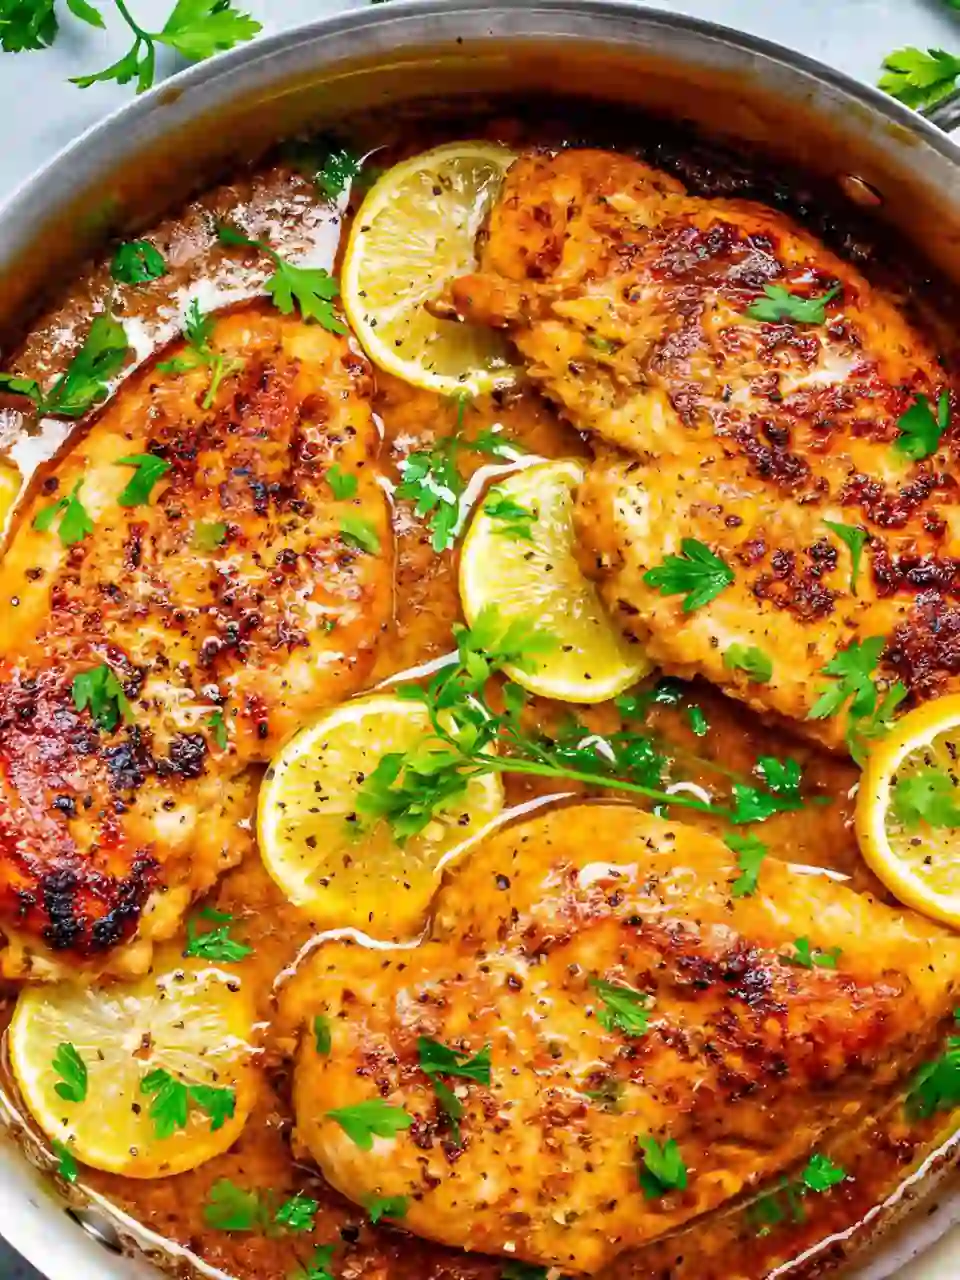 Lemon Garlic Butter Chicken and Green Beans Skillet - Balanced Nutrition with Delicious Flavors 2024!